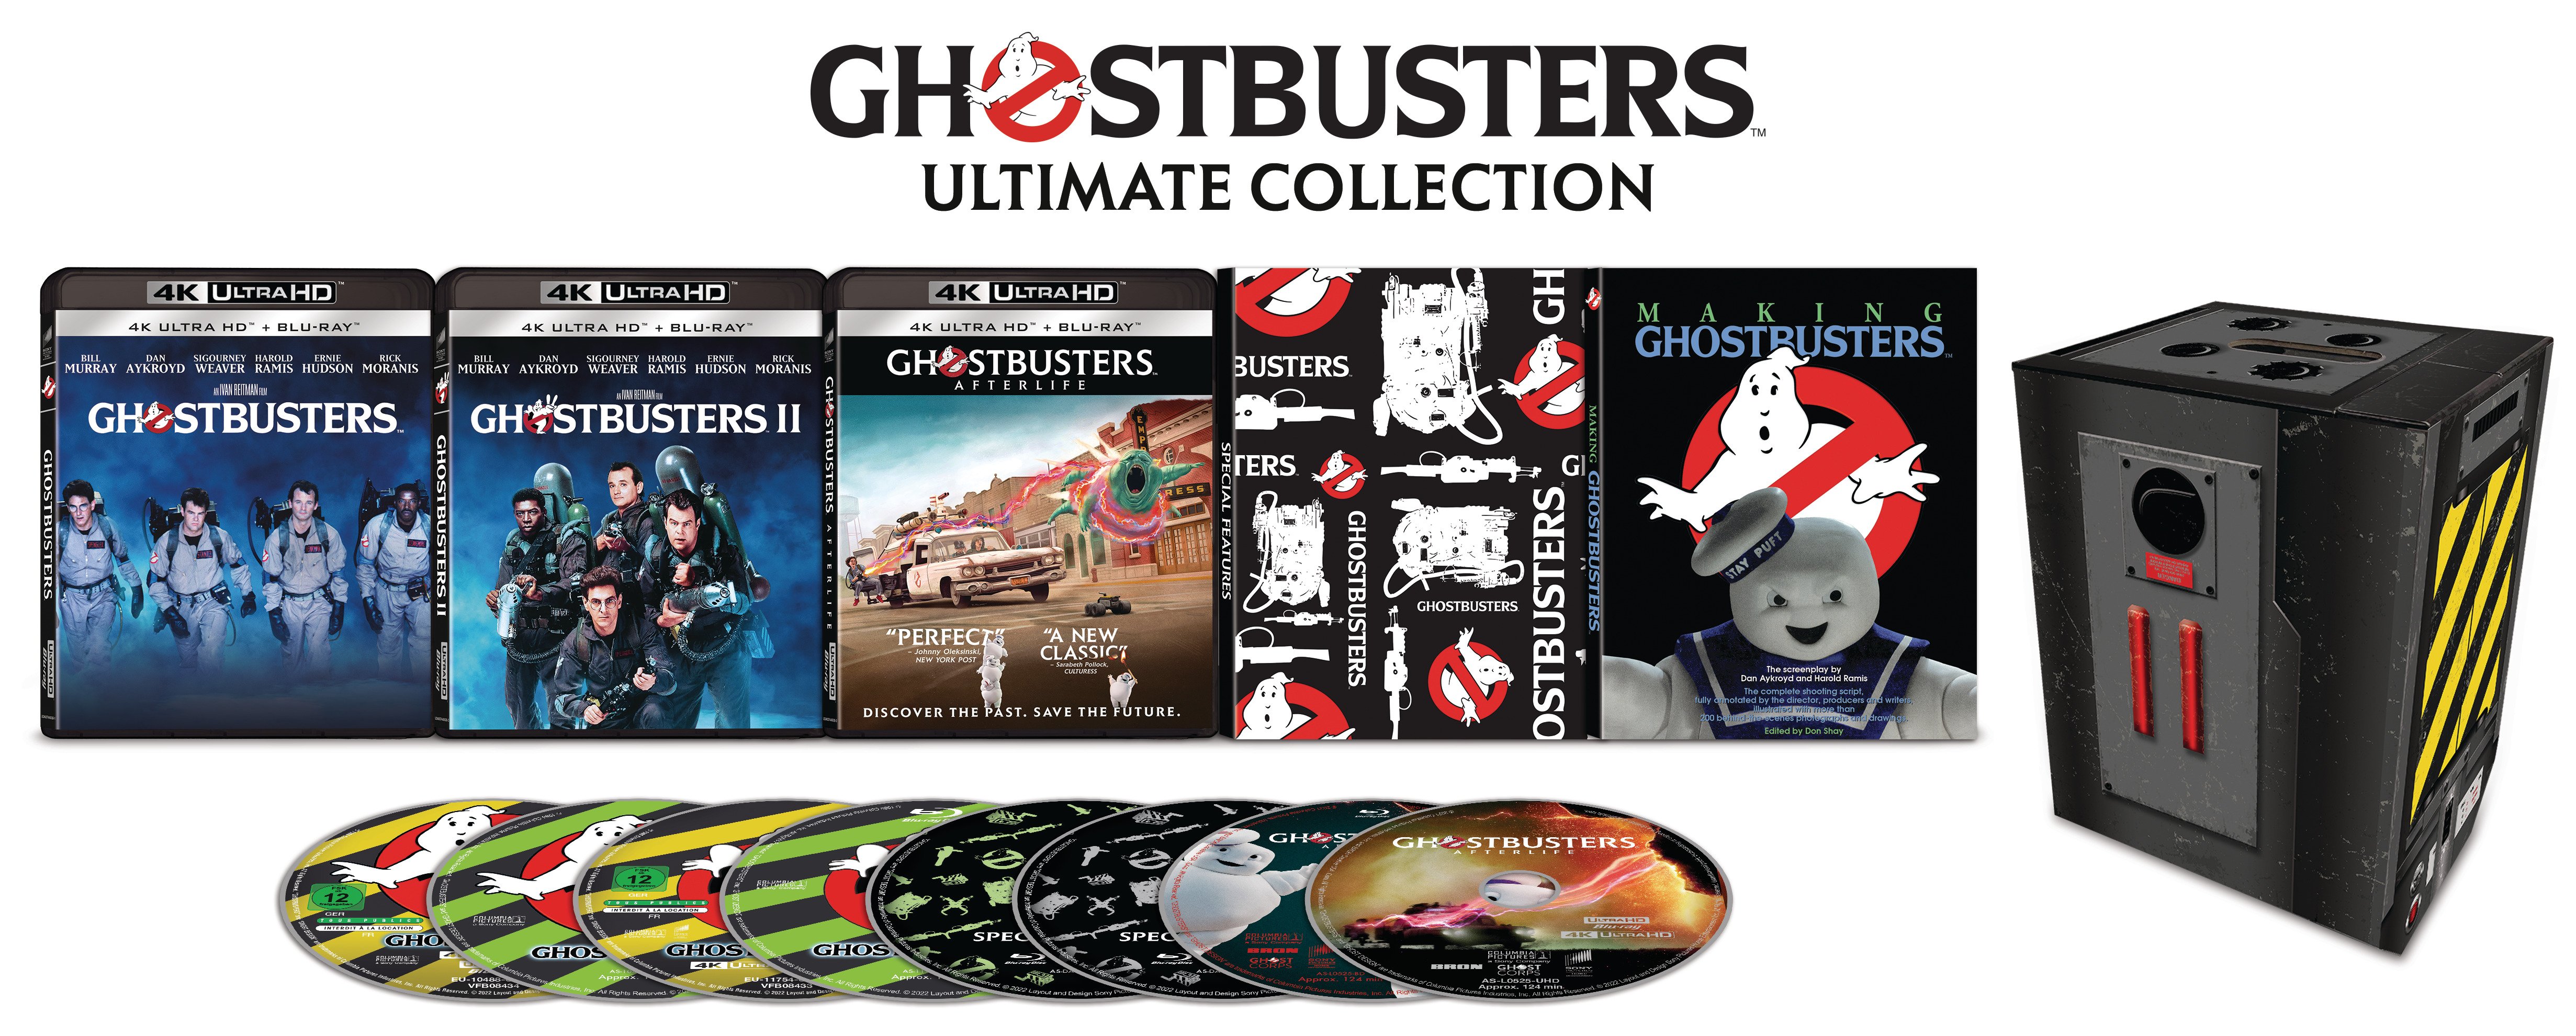 ghostbusters-ultimate-collection-4k-bd.jpg